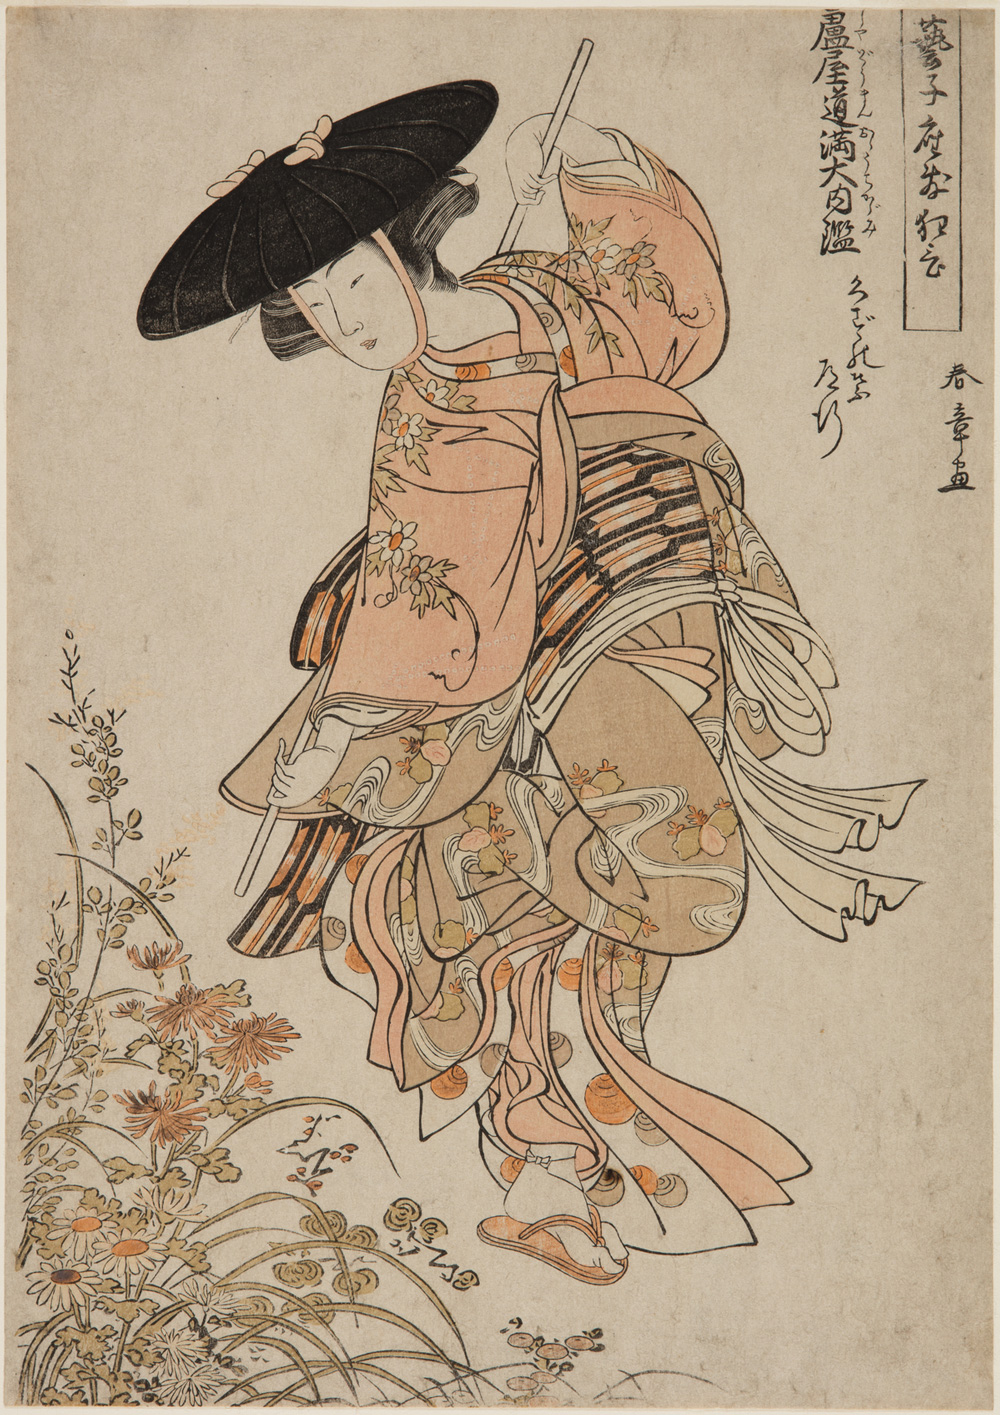 Japanese print of an actor dressed in elaborate traditional clothes standing by some flowers.